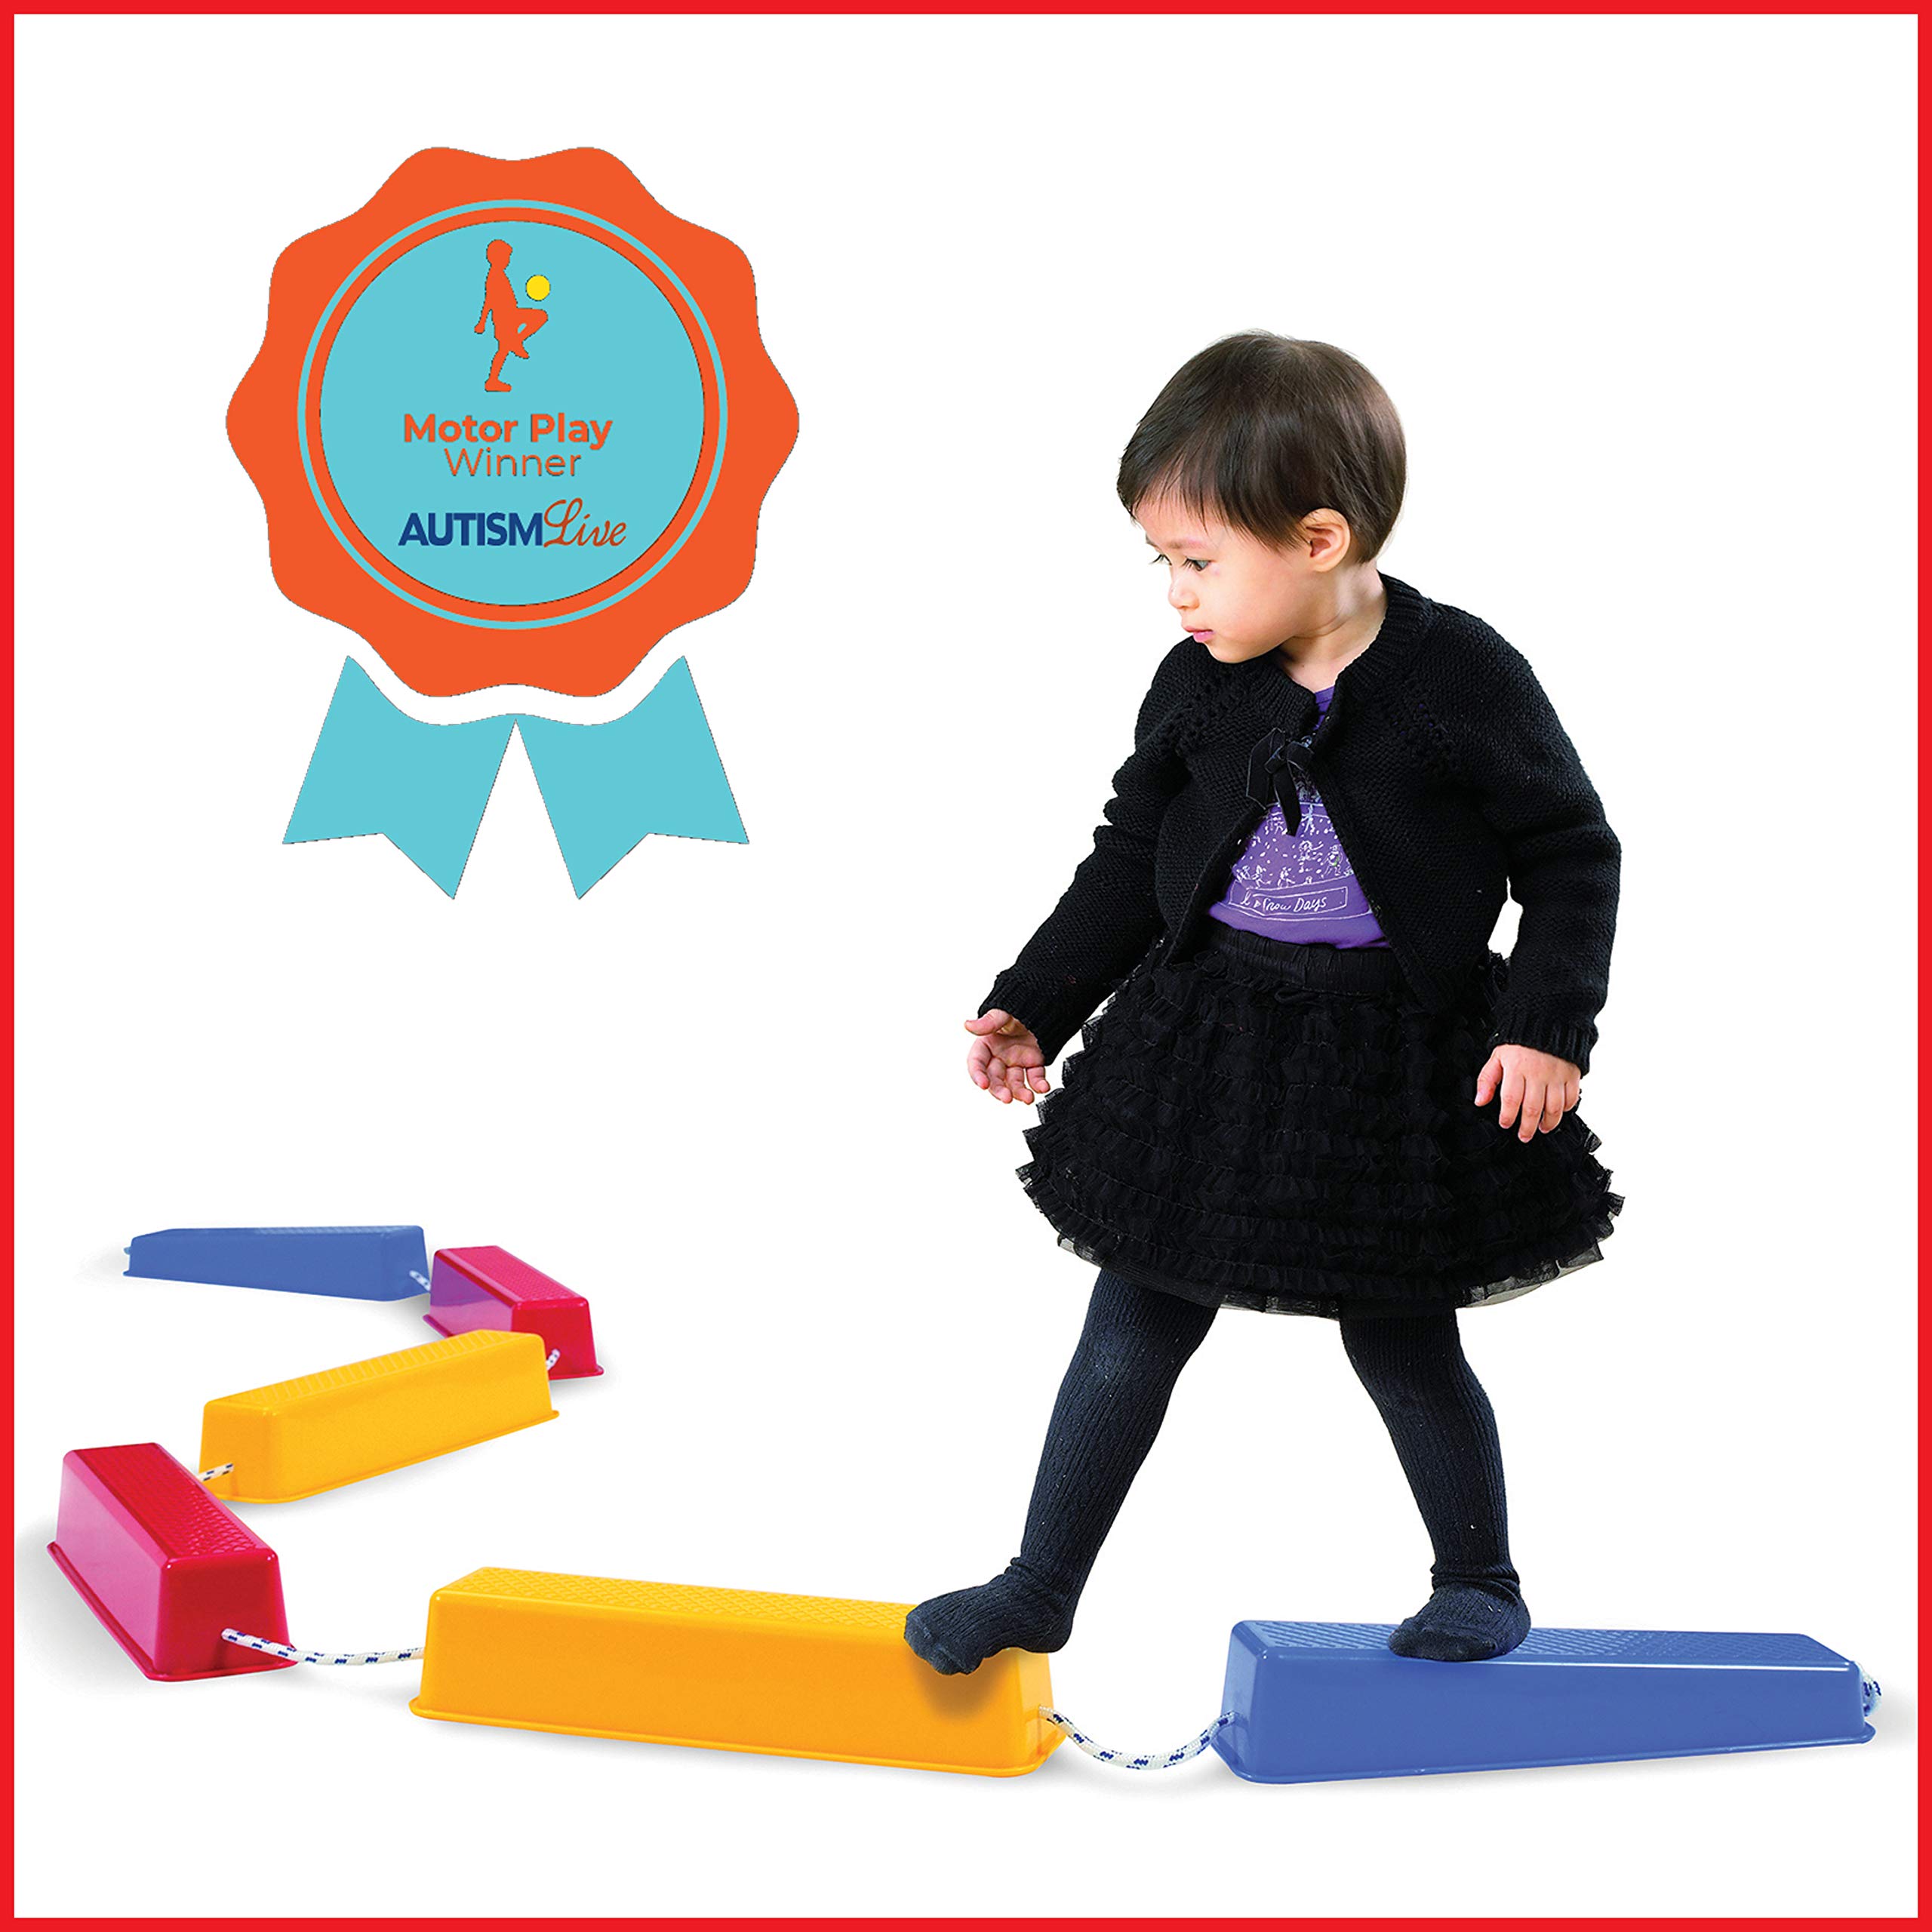 edxeducation Step-a-Logs - Supplies for Physical Play - Indoor and Outdoor - Exercise and Gross Motor Skills - Stackable - Build Coordination